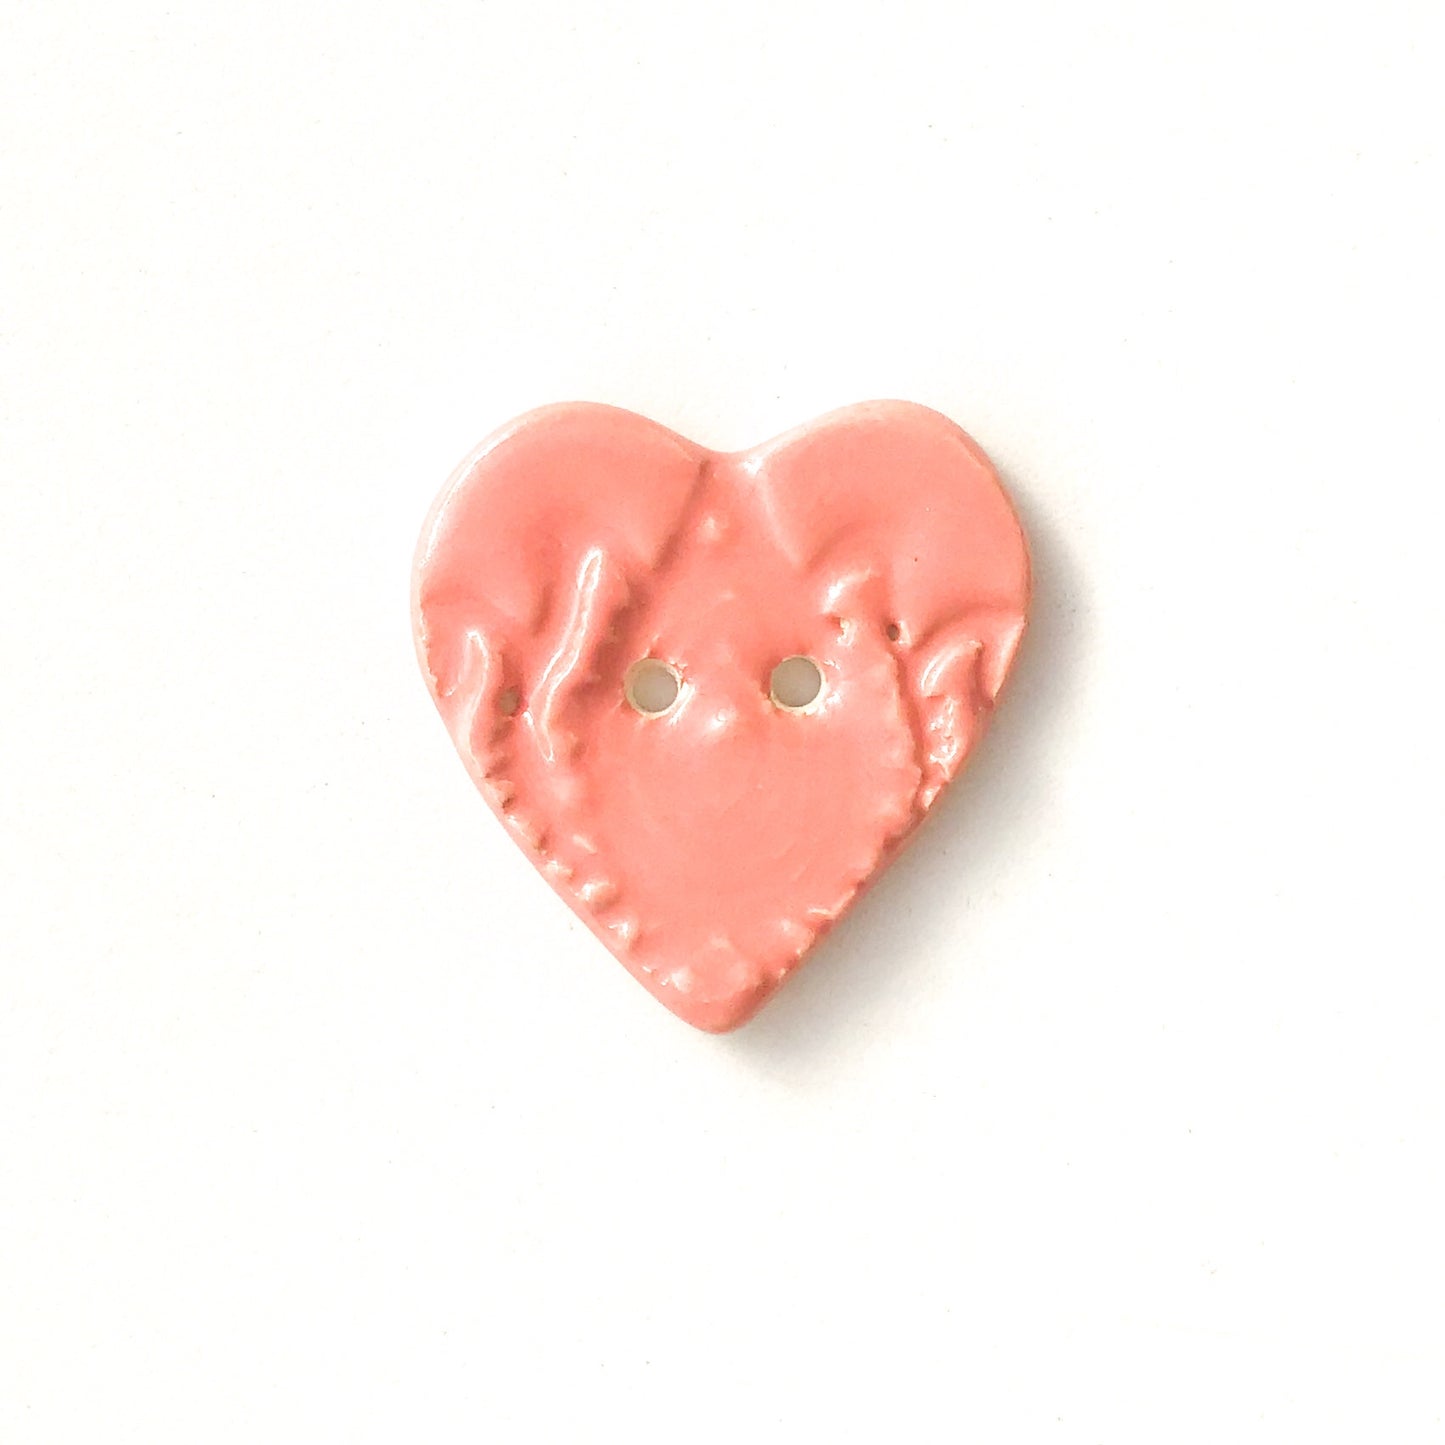 Large Stamped Heart Buttons - Ceramic Heart Button - 1 3/8"